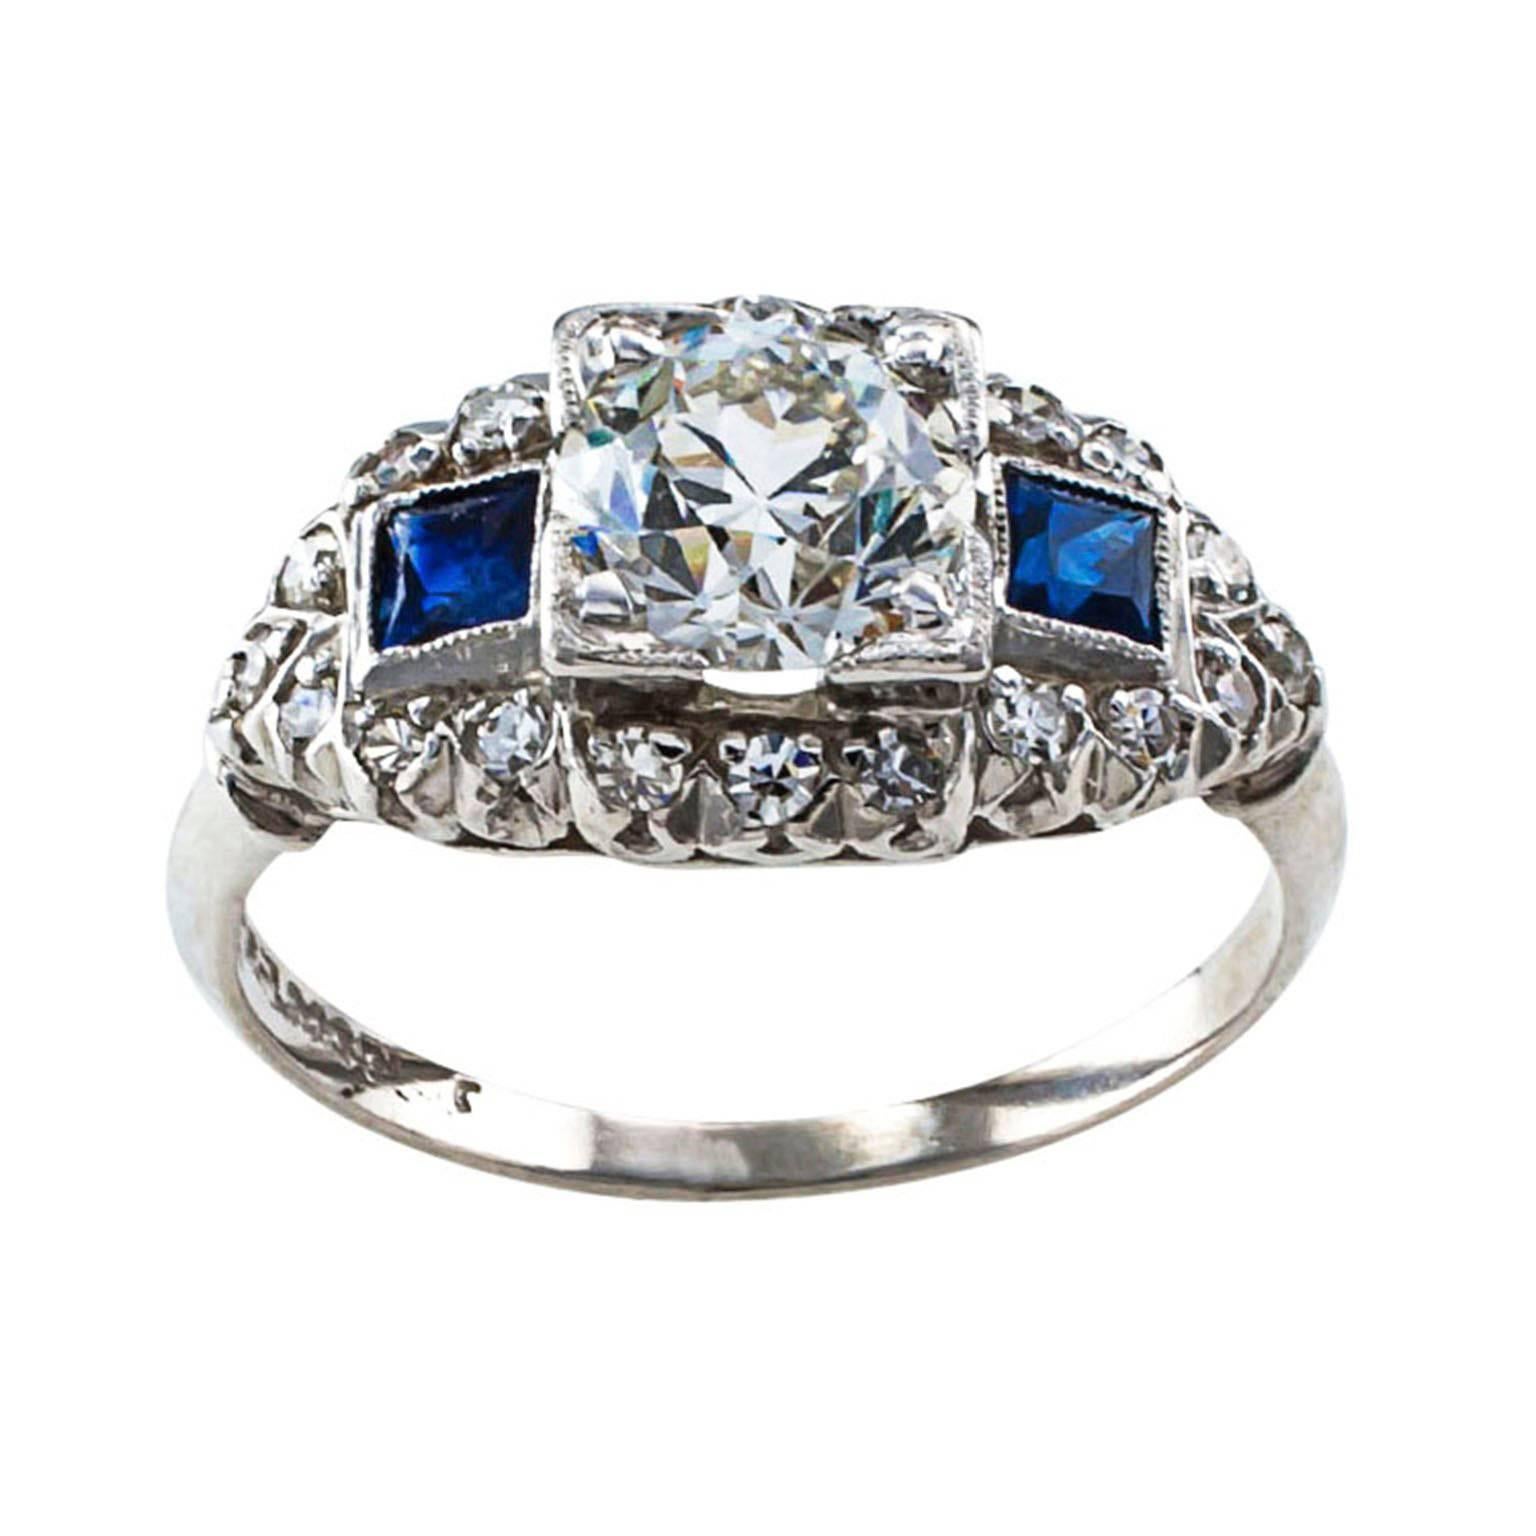 .92 Carat Diamond and Sapphire Art Deco Engagement Ring

The Real Thing! Genuine late Art Deco engagement ring displaying emerging changes in design gravitating to the modernist and lavish lines that would become known as Retro and Mid Century. 